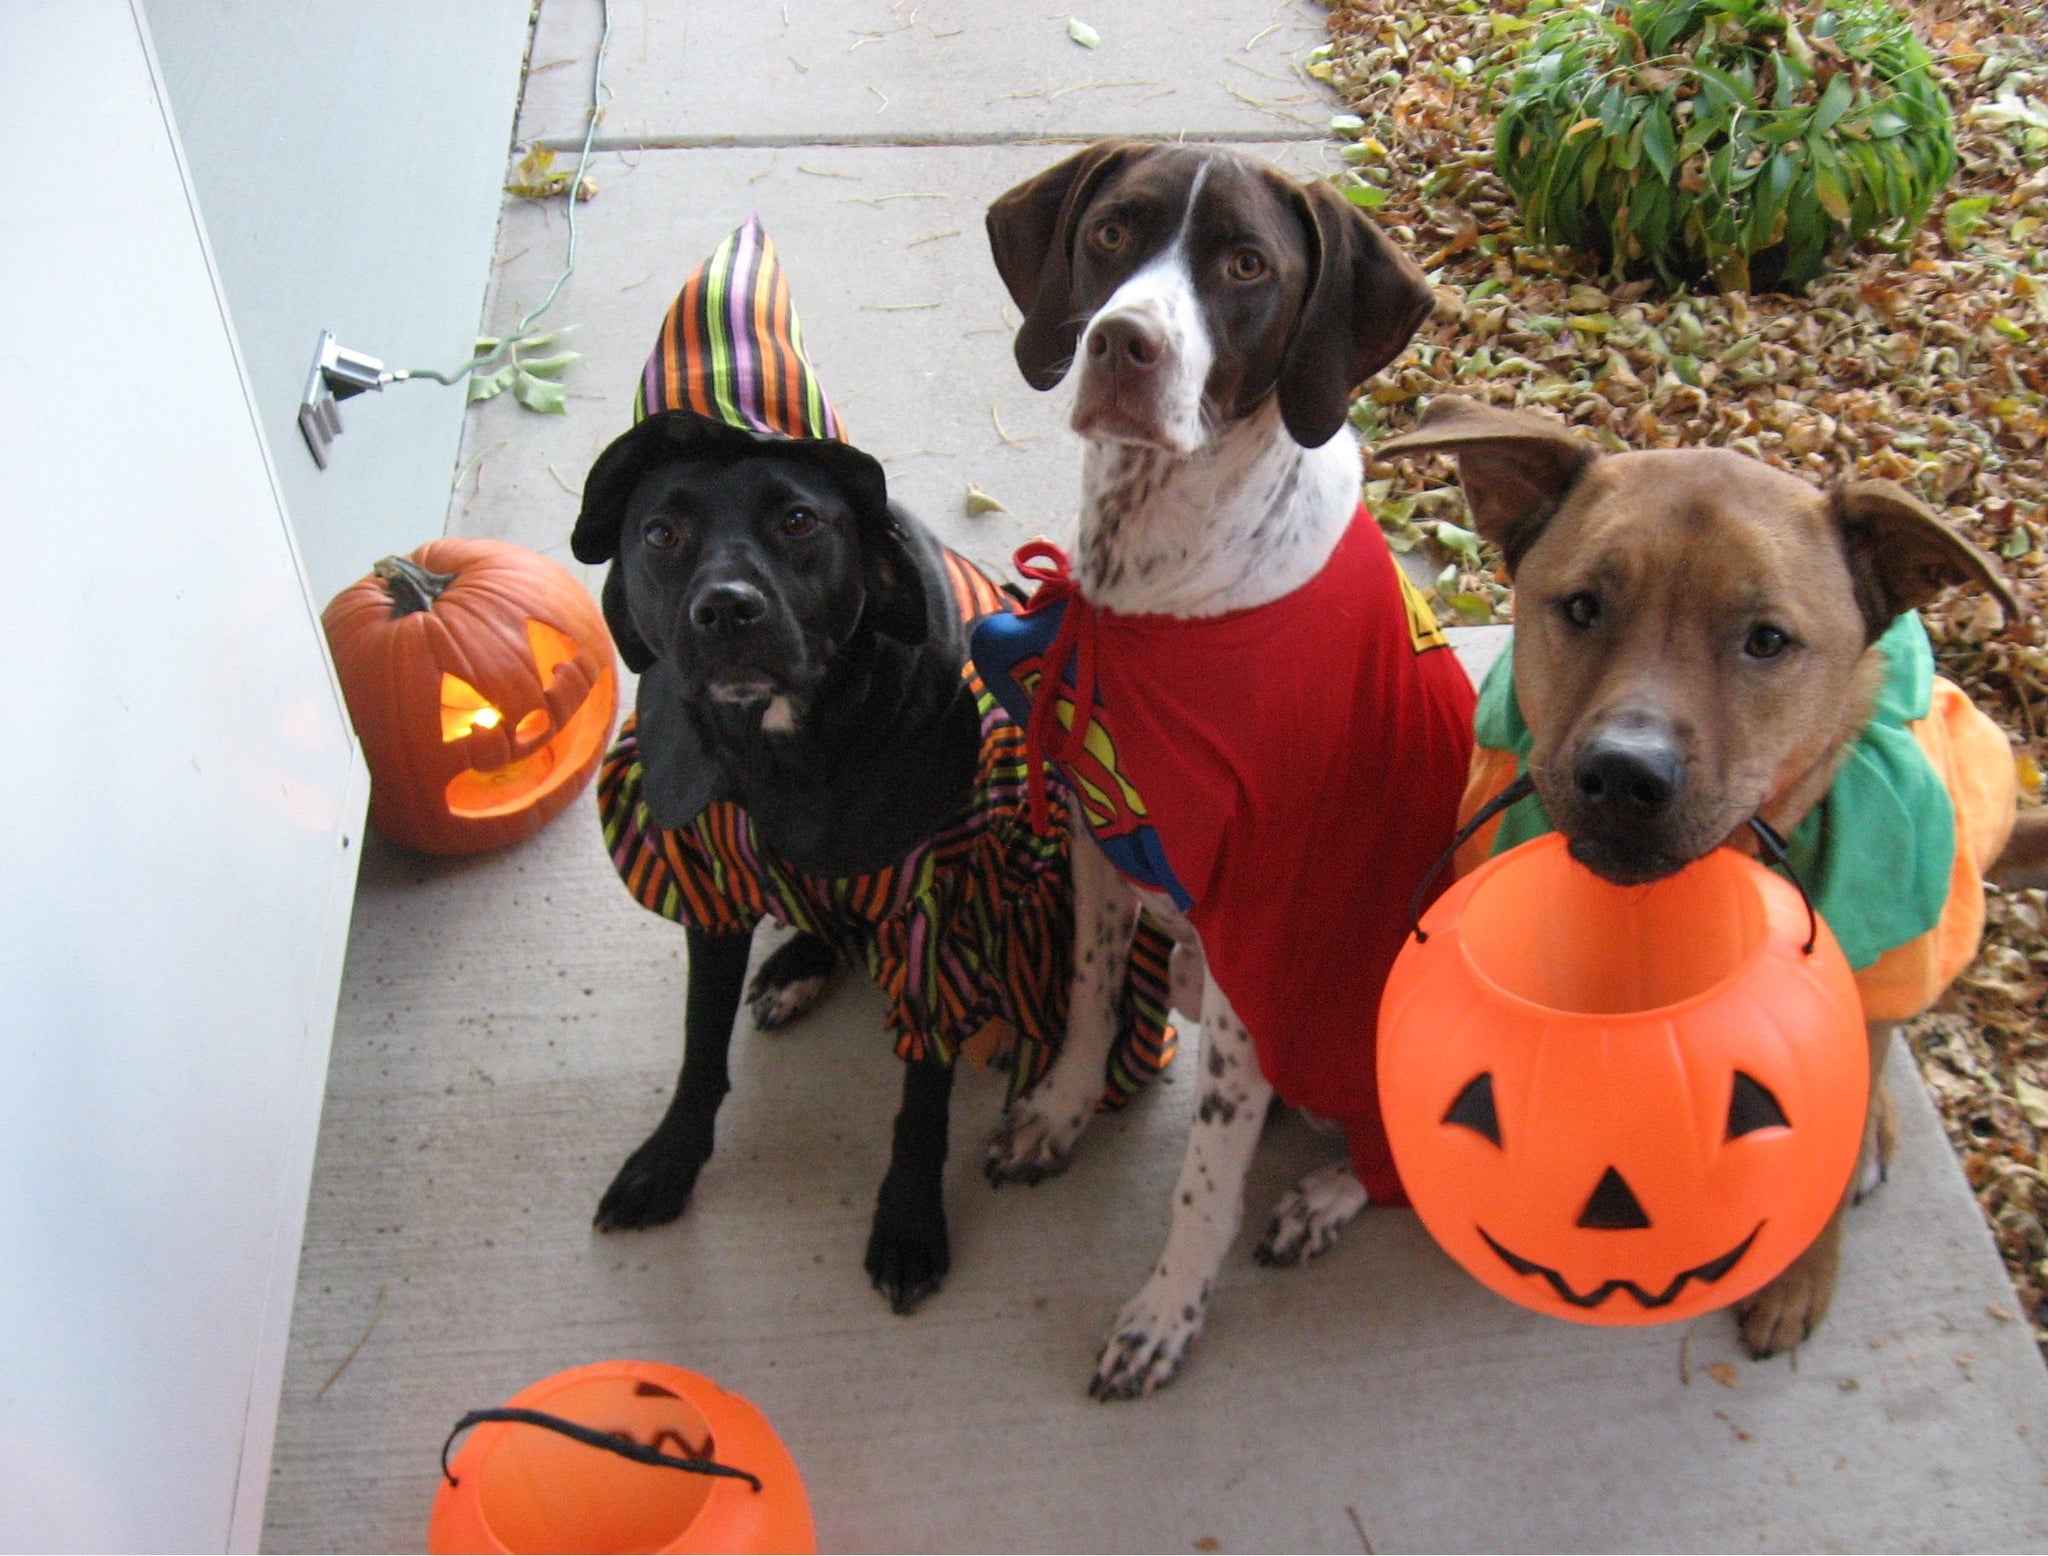 Halloween Safety Tips from the ASPCA